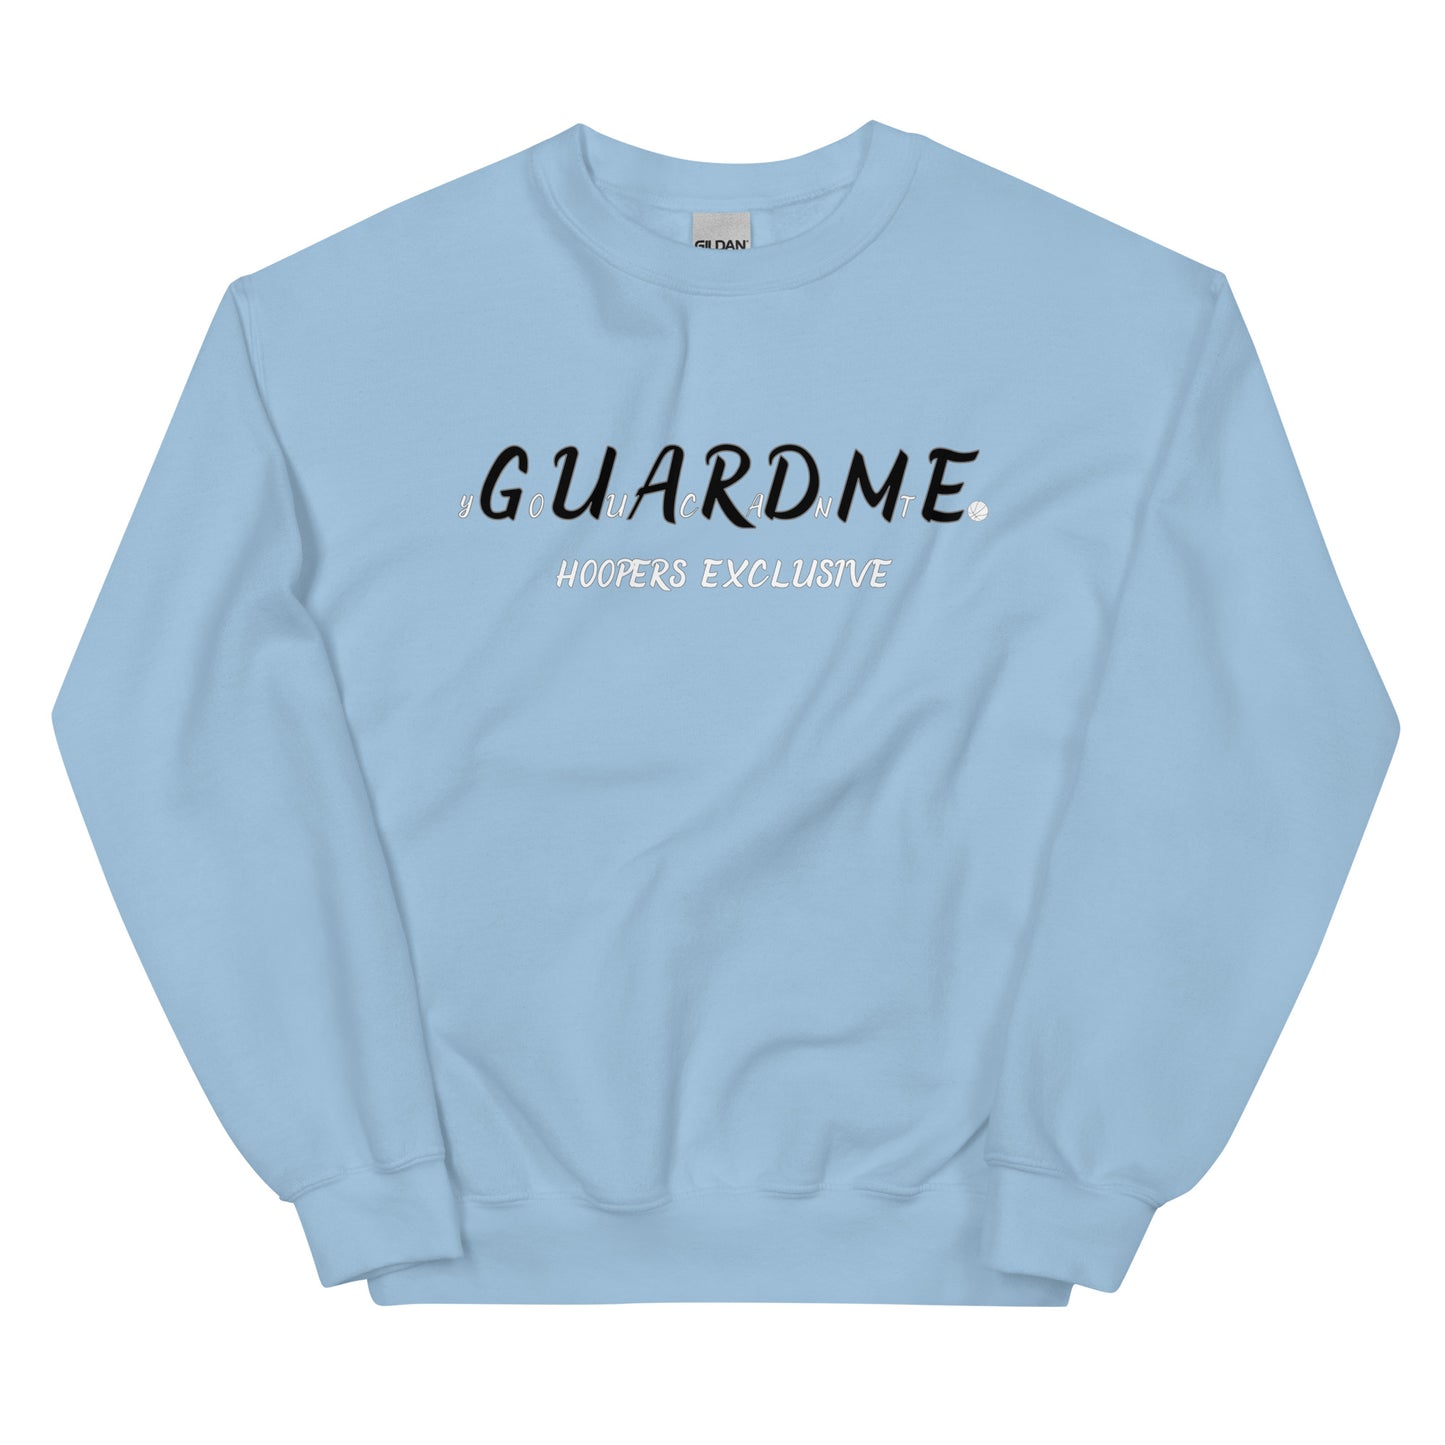 You Can't Guard Me Crew Neck